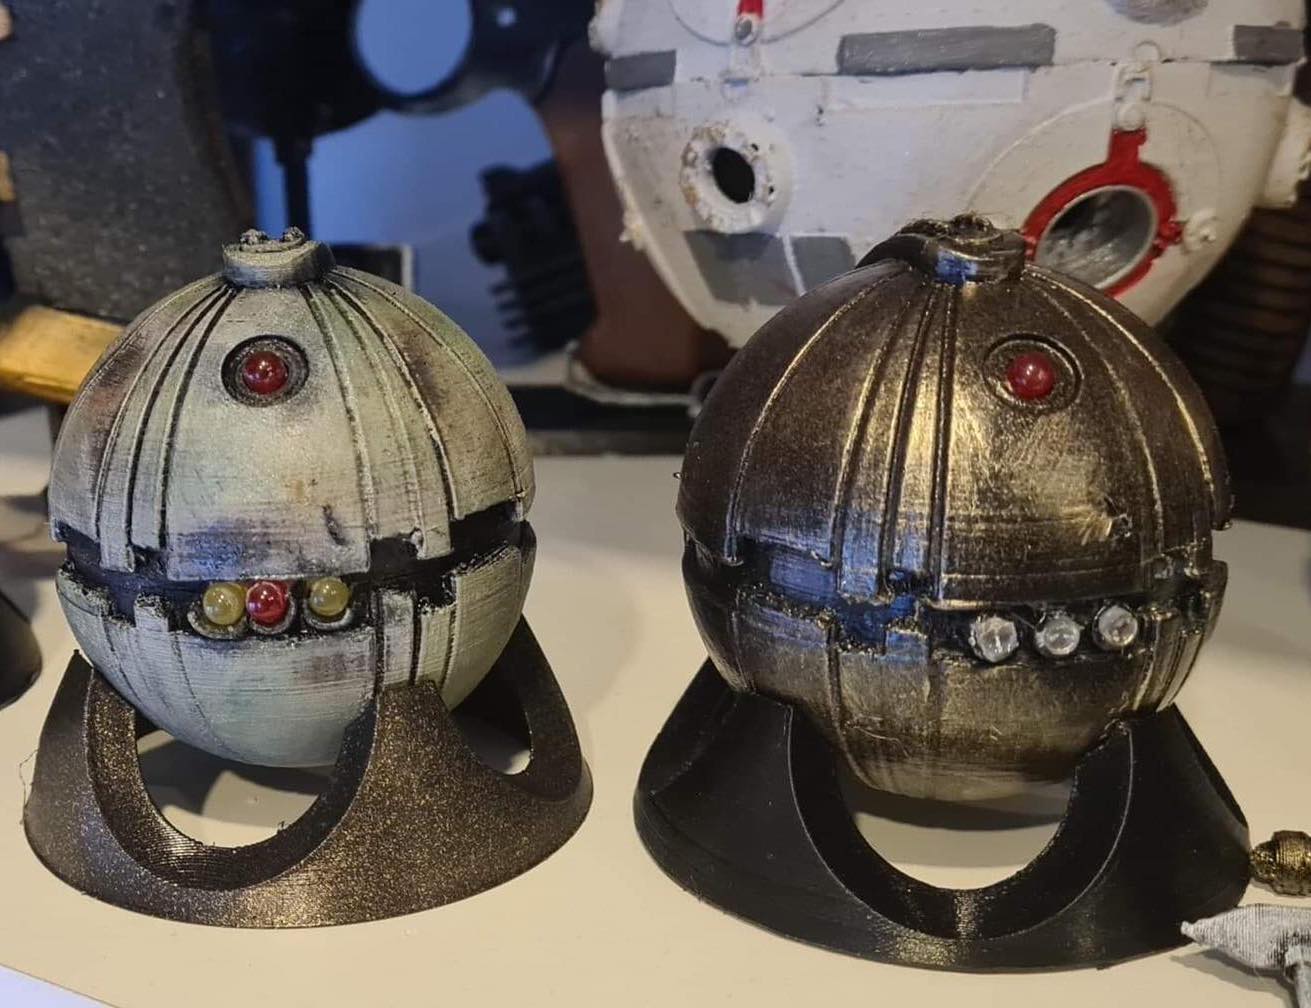 A photo of a 3D printed thermal detonator device, set on a display stand.